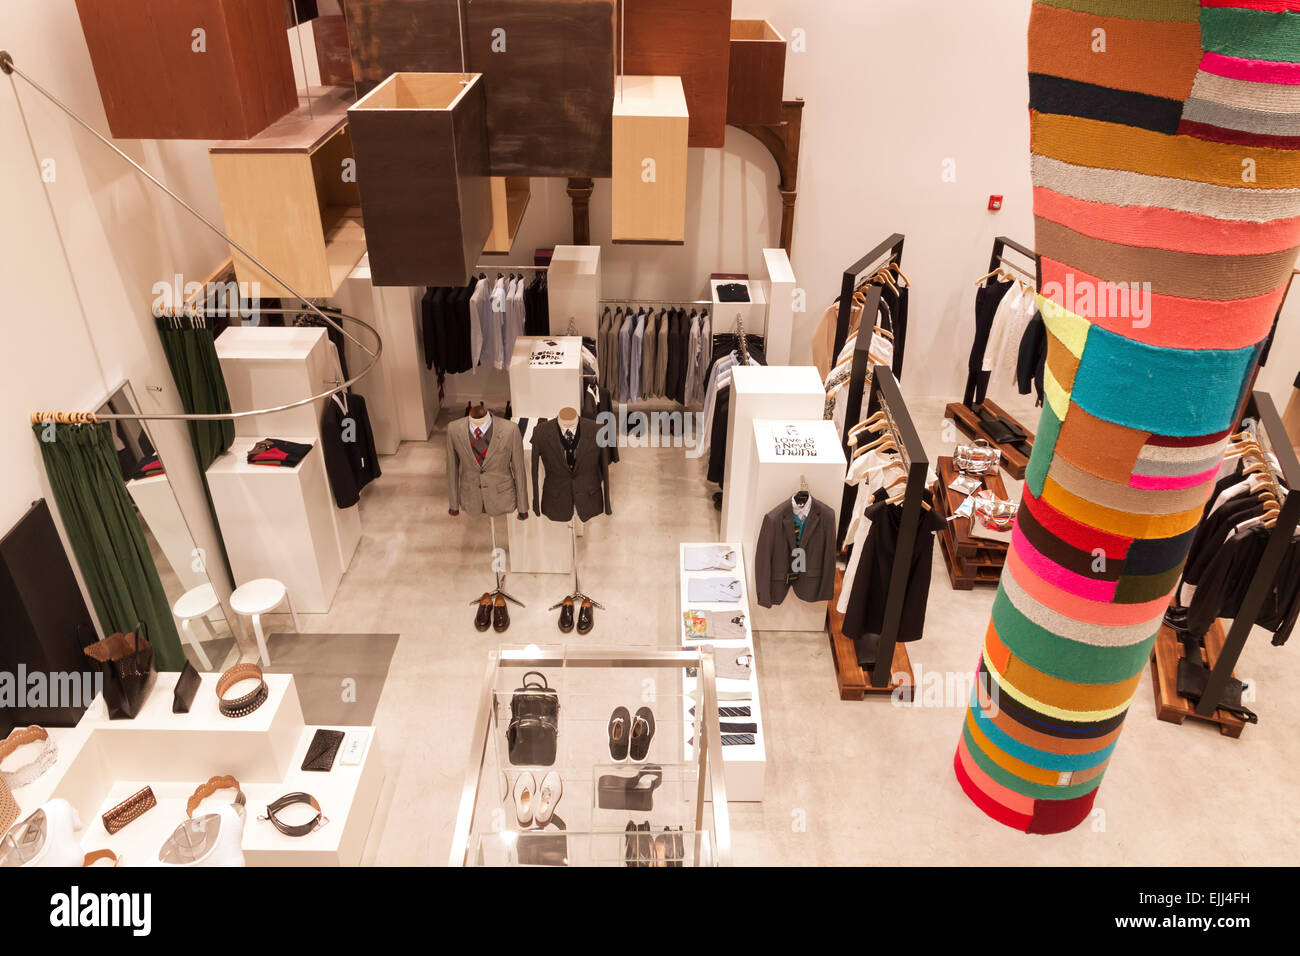 Men's and women's clothing store, Comme des Garcons, in the Dover Street Market, New York City. Stock Photo